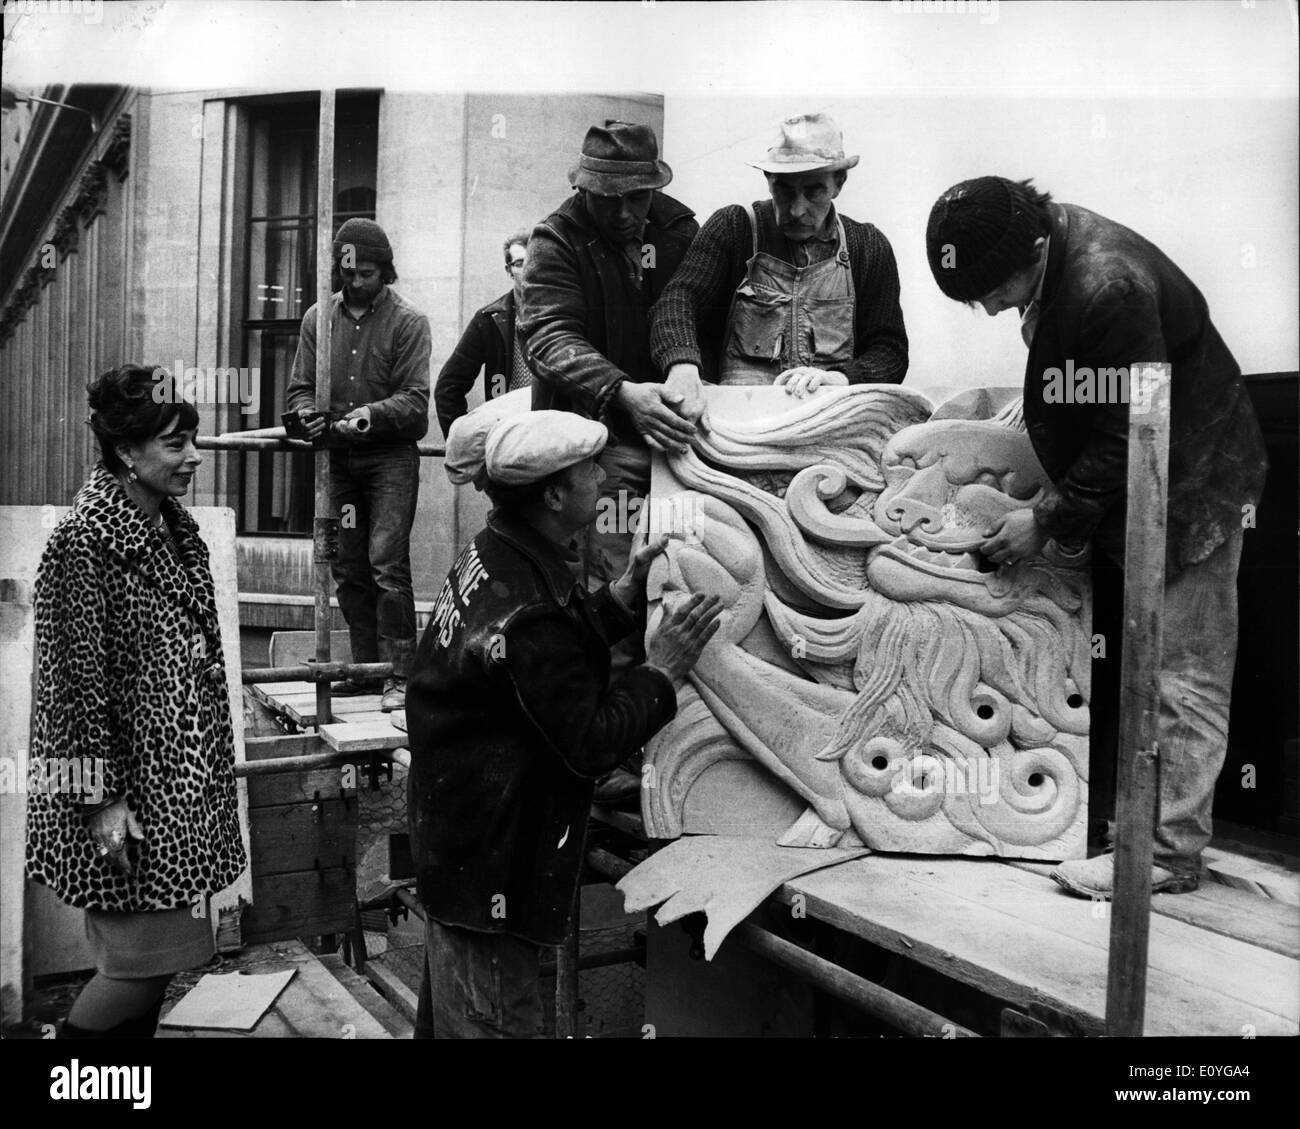 Apr. 04, 1970 - Sculptress Watchers Motifs Placed In Position: Sculptress Mitzi Cunliffe came from Brighton to watch her 6ft. square Scottish motifs being placed in position on the facade of the Scottish Life Assurance Company's new building in the City. Photo shows. Mitzi Cunliffe supervising the placing of the stone blocks today, on the faccade of the Scottish Life Assurance Company's building in the City, today. Stock Photo